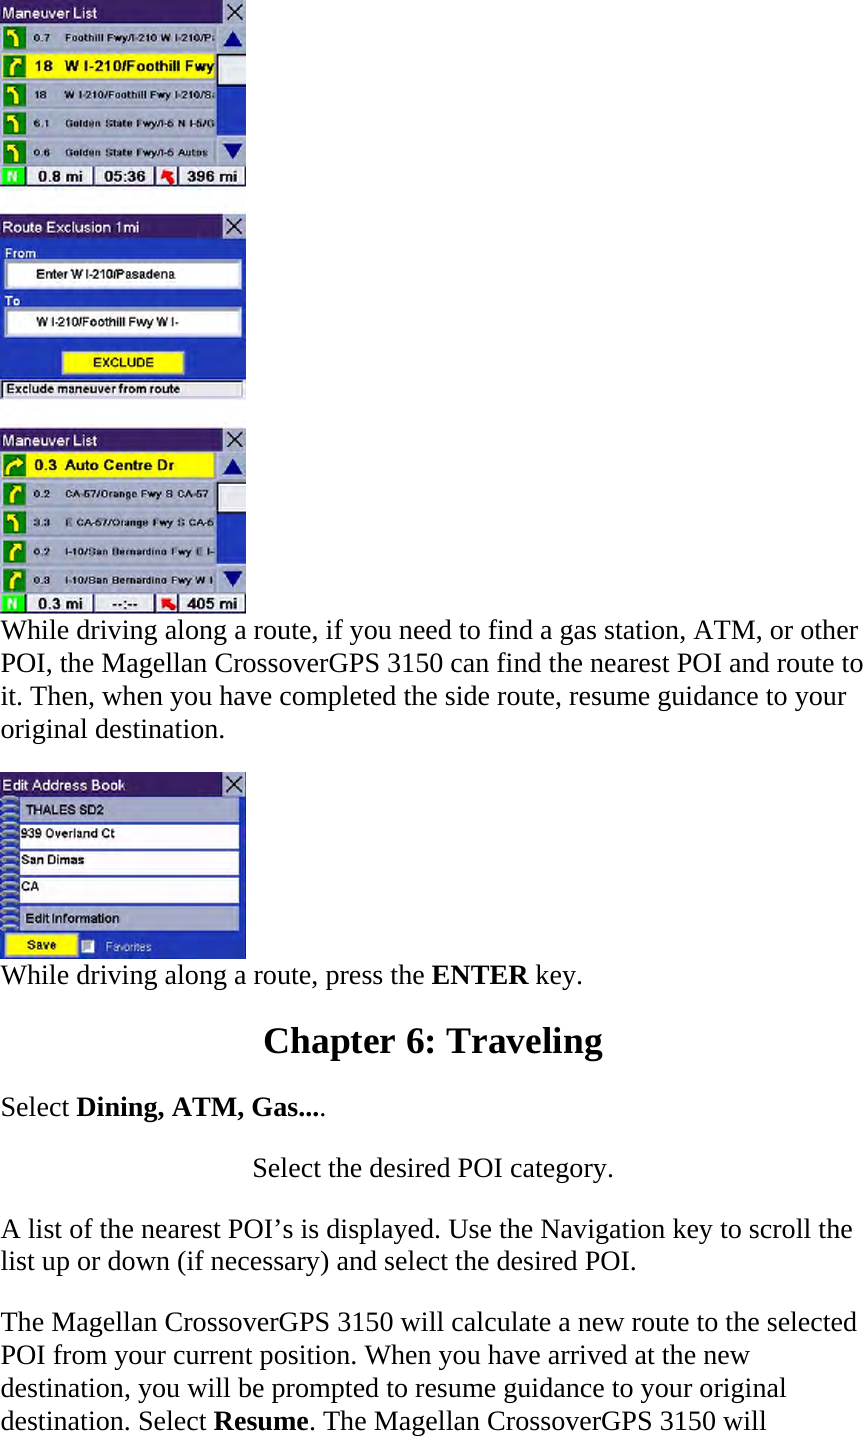  While driving along a route, if you need to find a gas station, ATM, or other POI, the Magellan CrossoverGPS 3150 can find the nearest POI and route to it. Then, when you have completed the side route, resume guidance to your original destination.   While driving along a route, press the ENTER key.  Chapter 6: Traveling  Select Dining, ATM, Gas....  Select the desired POI category.  A list of the nearest POI’s is displayed. Use the Navigation key to scroll the list up or down (if necessary) and select the desired POI.  The Magellan CrossoverGPS 3150 will calculate a new route to the selected POI from your current position. When you have arrived at the new destination, you will be prompted to resume guidance to your original destination. Select Resume. The Magellan CrossoverGPS 3150 will 